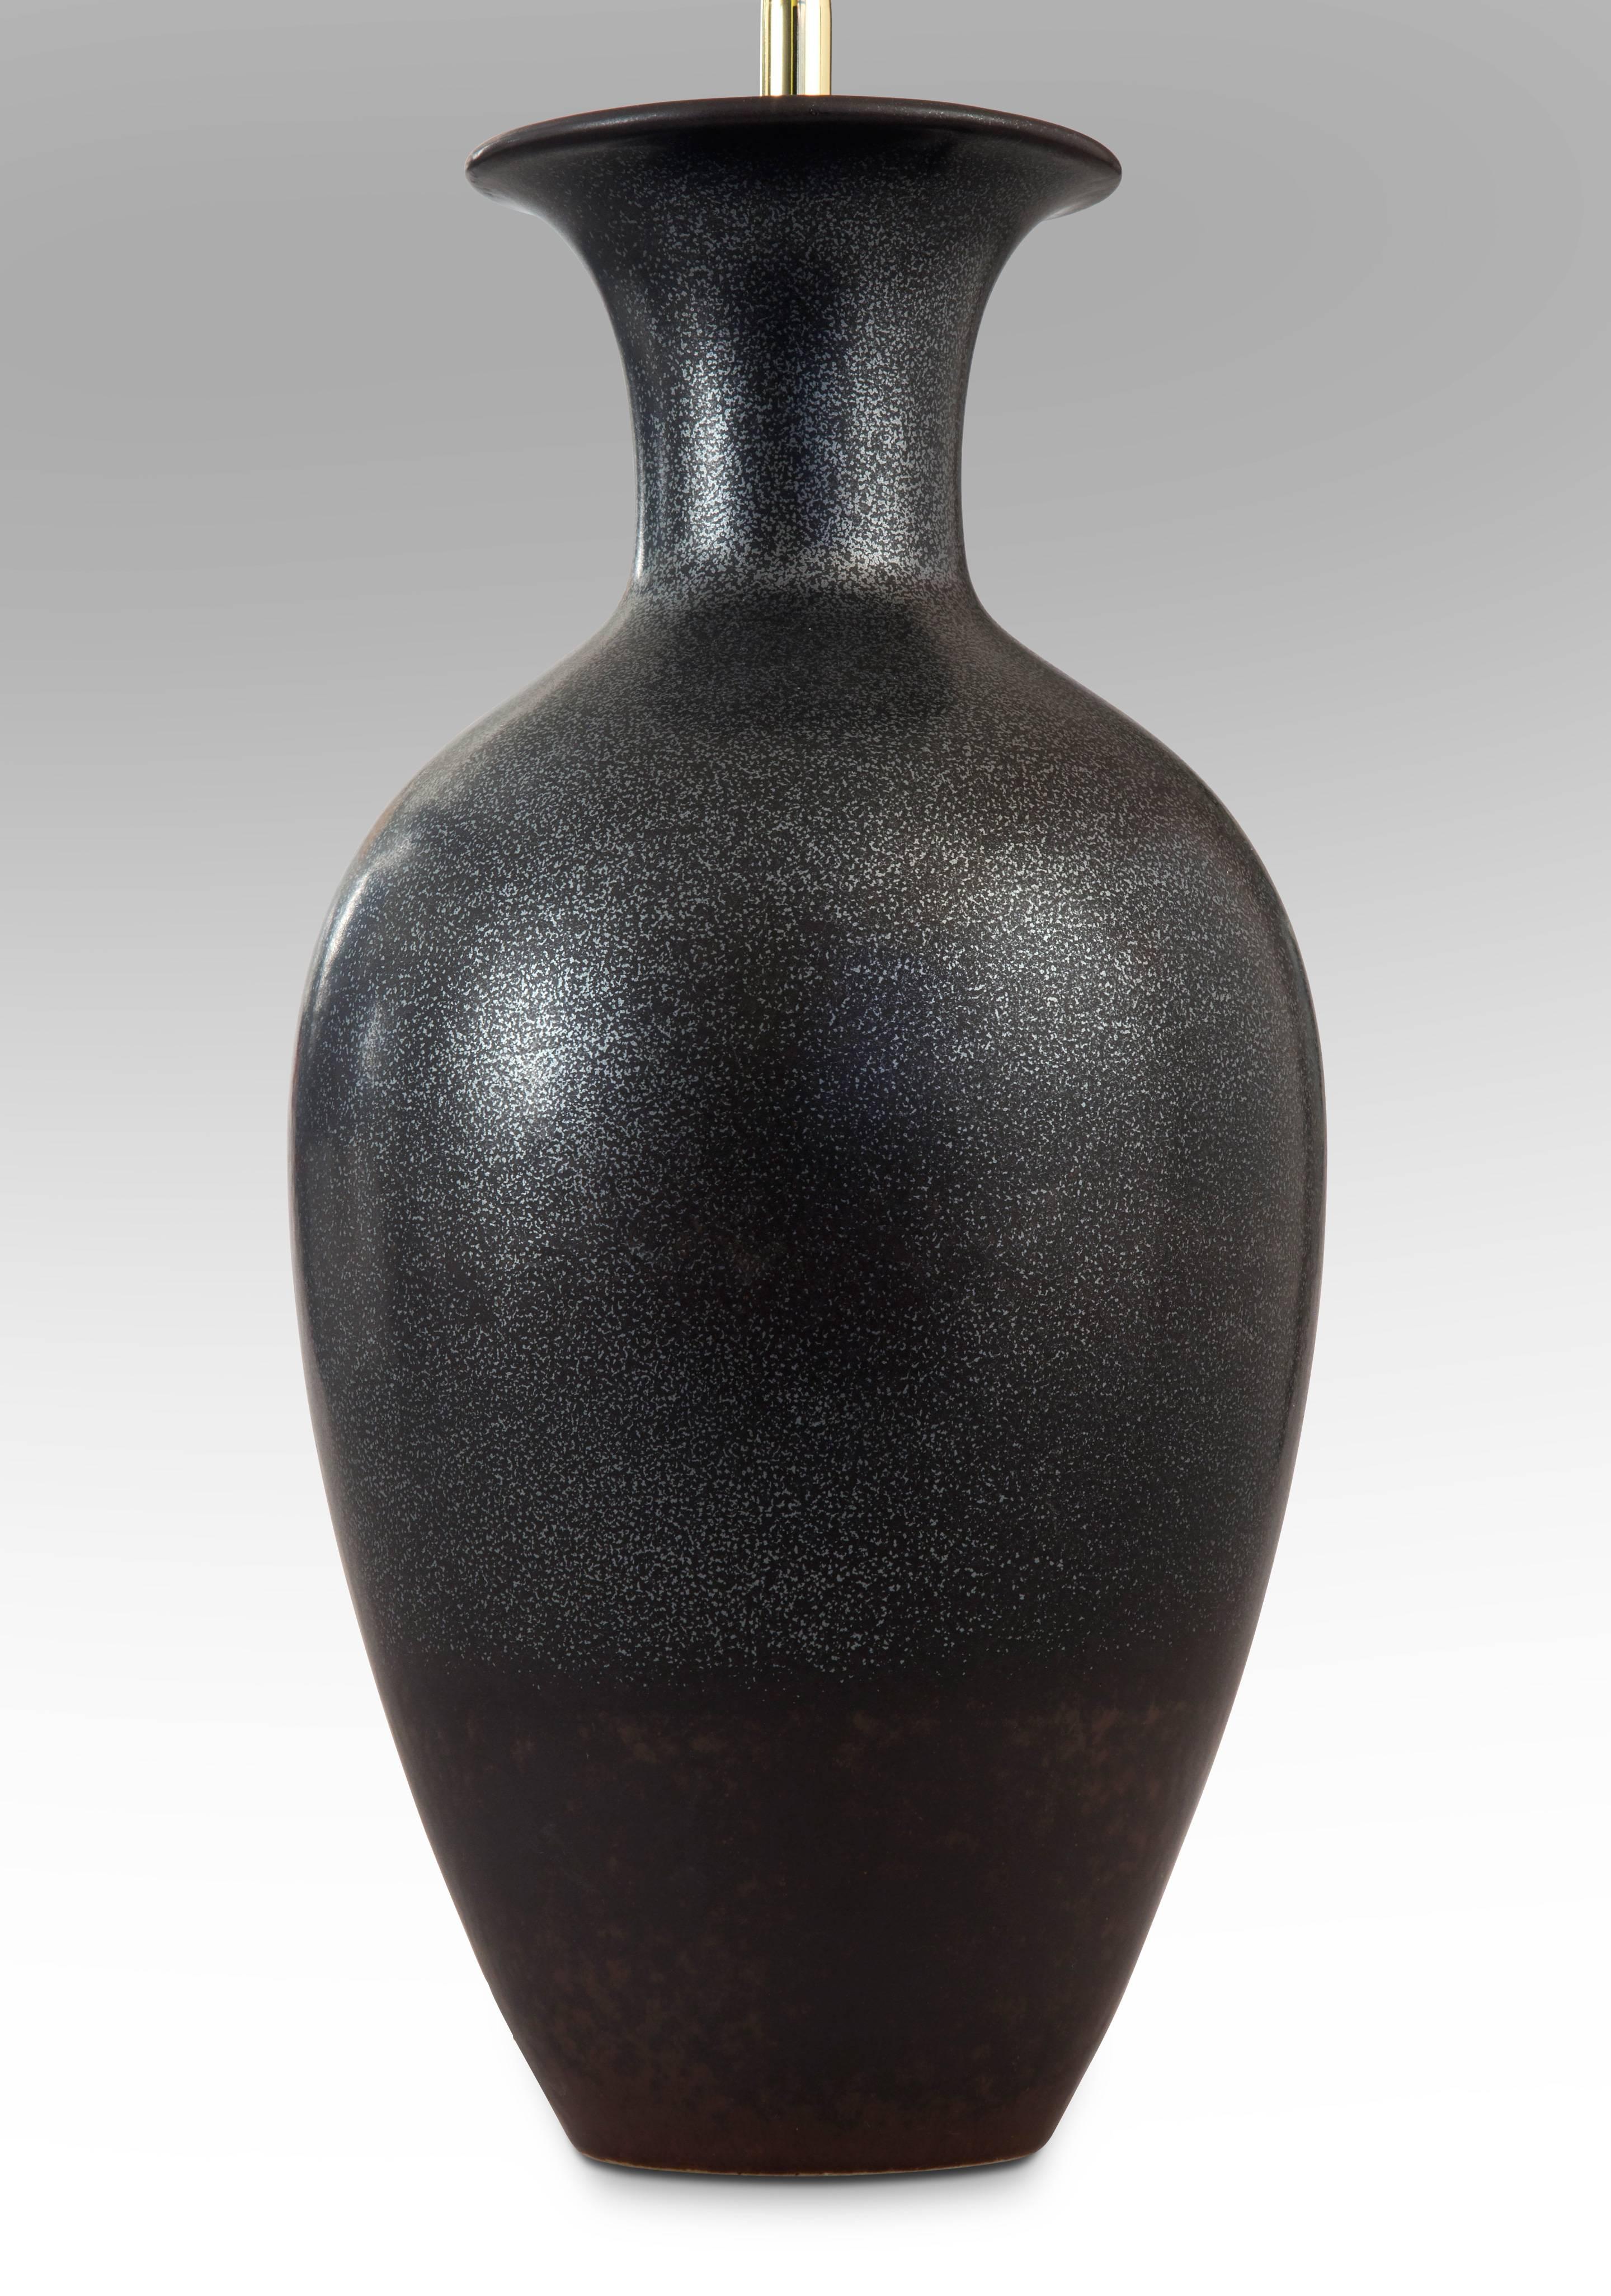 The flared neck above an elegant, high shouldered ovoid body, the upper part with speckled graphite glaze and the bottom portion a rusty-brown glaze. 

Very good condition and ready to add to your collection. Museum wired, not drilled, lamp can